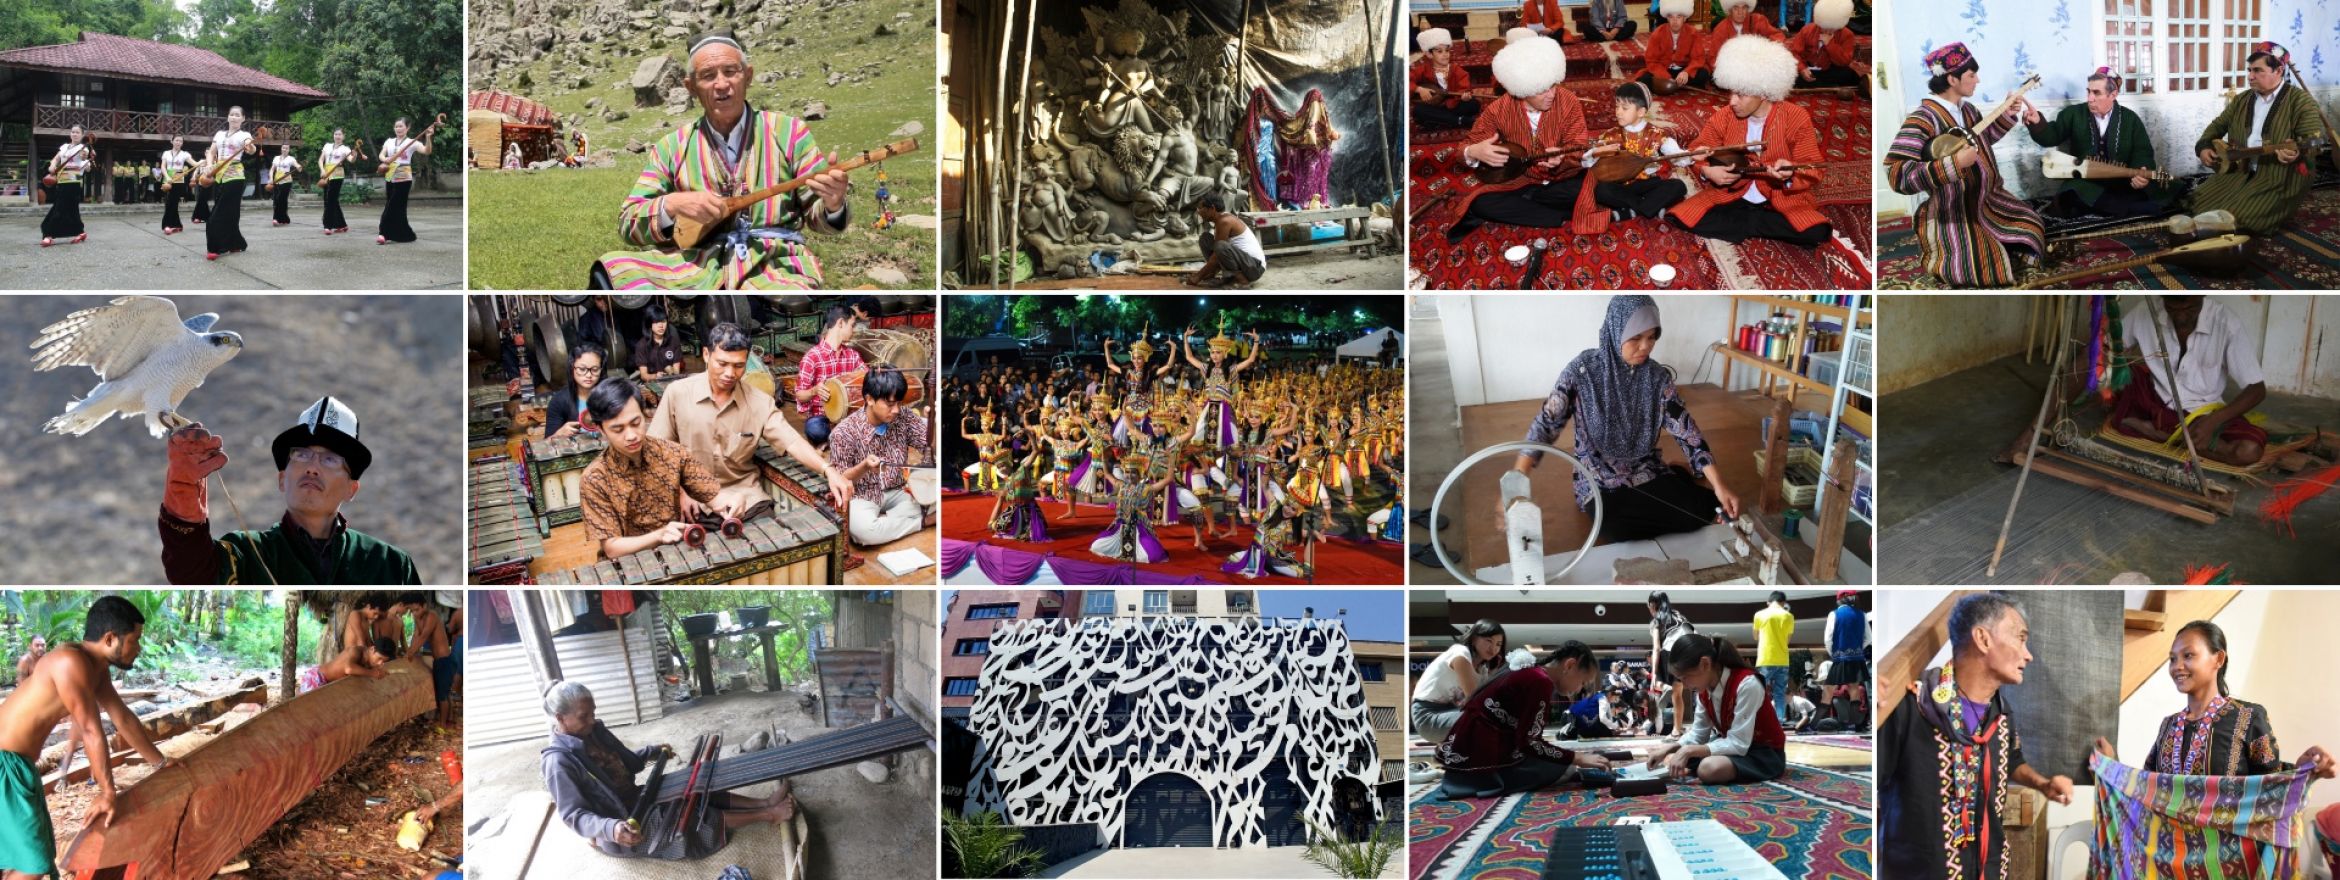 UNESCO Safeguards Intangible Cultural Heritage: Intergovernmental Committee inscribes 43 new elements to its Intangible Cultural Heritage Lists, 12 from Asia-Pacific